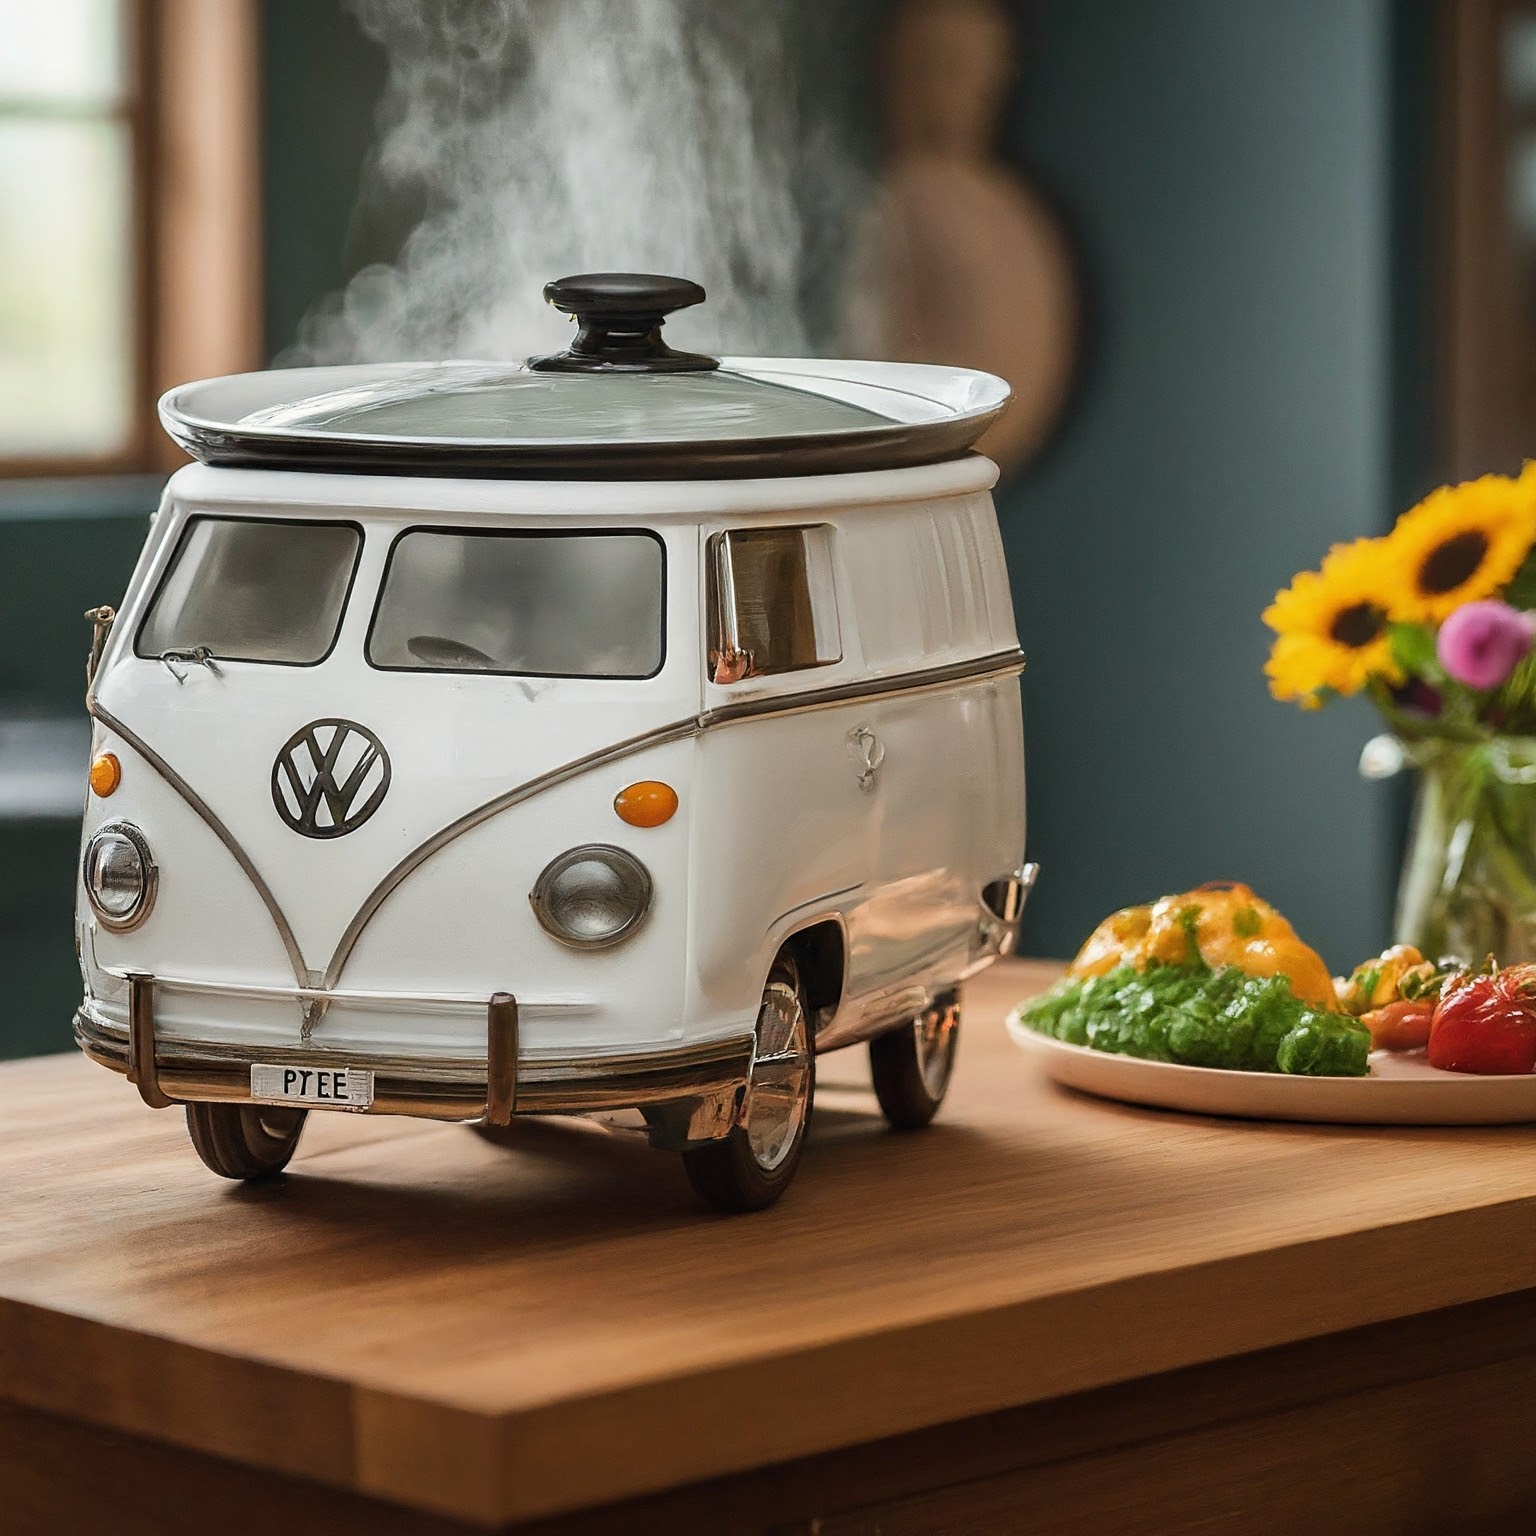 Volkswagen Bus Shaped Slow Cookers: Infusing Retro Vibes into Your Kitchen Adventure luxarts volkswagen bus slow cookers 13